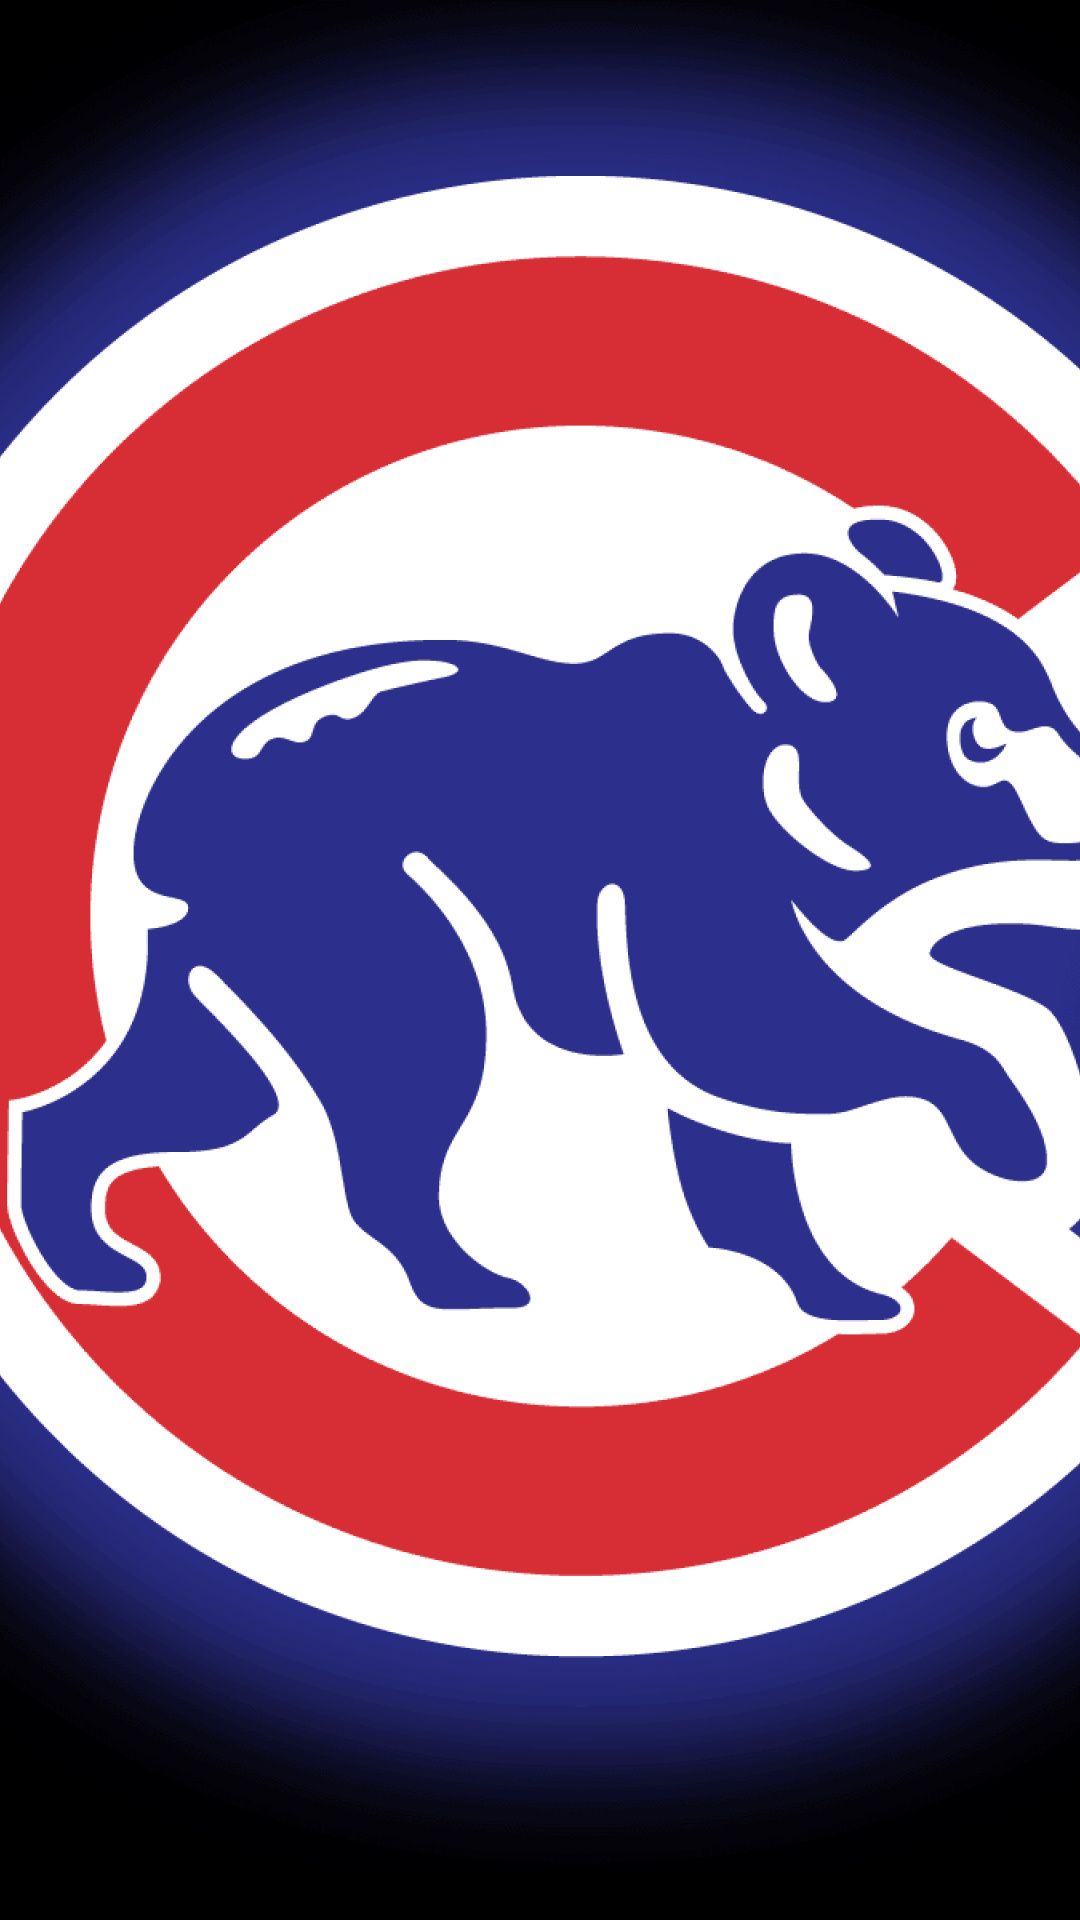 Cubs Iphone Wallpapers